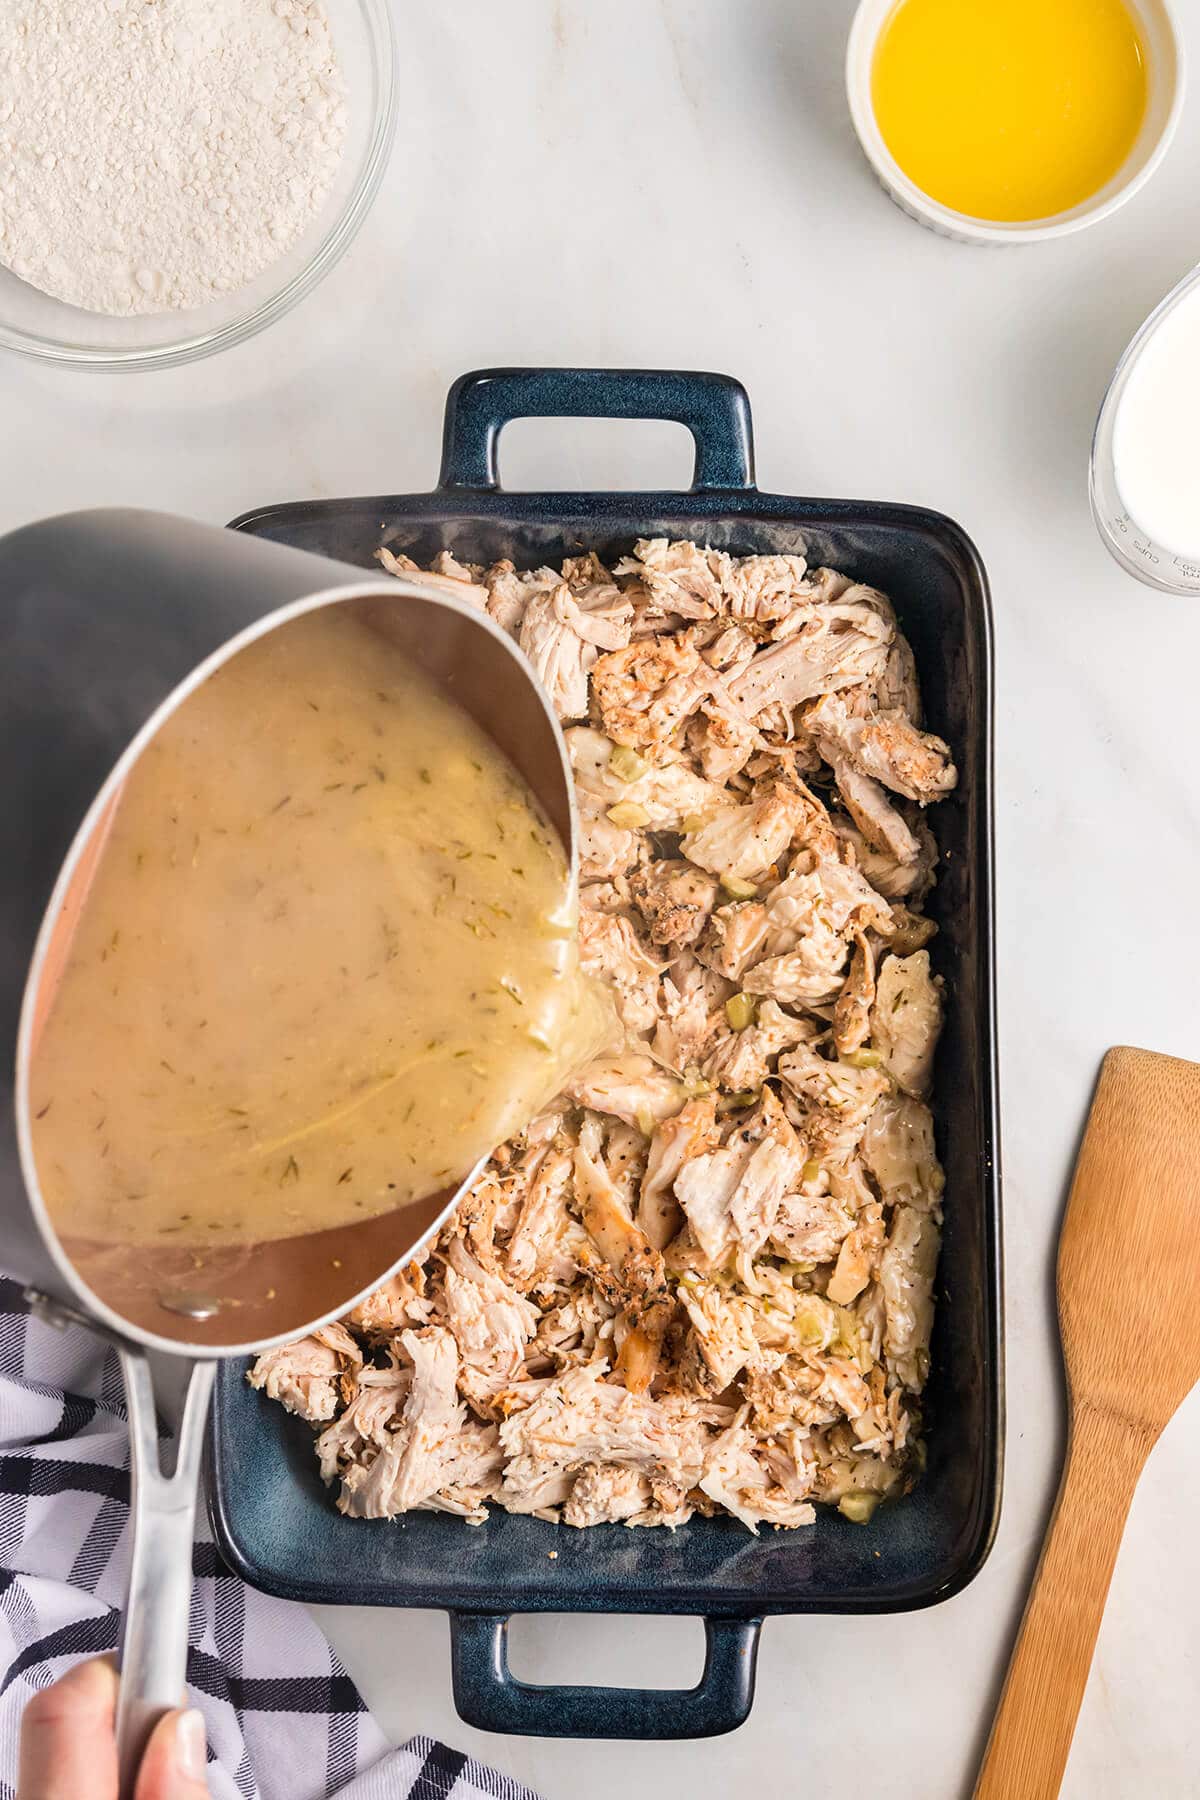 Pouring broth onto shredded chicken in a baking dish.